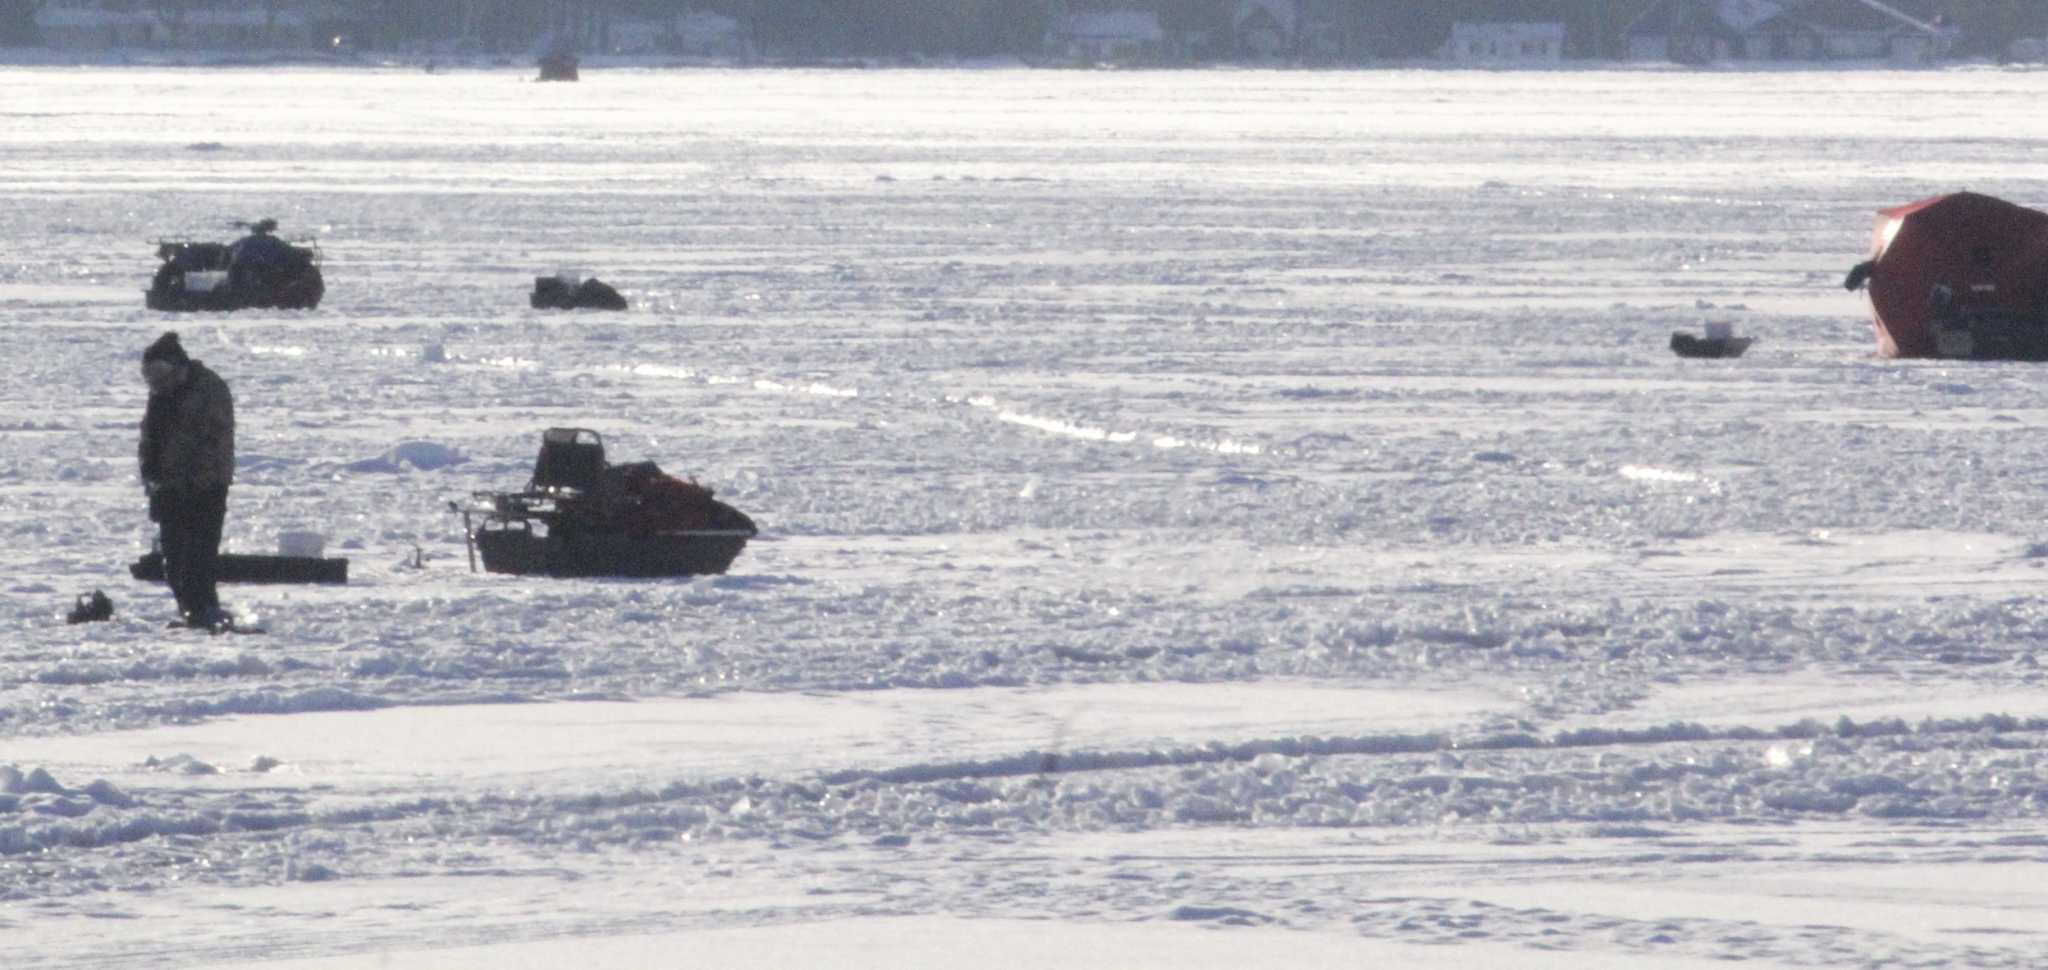 DNR says ice fishing is becoming more widespread